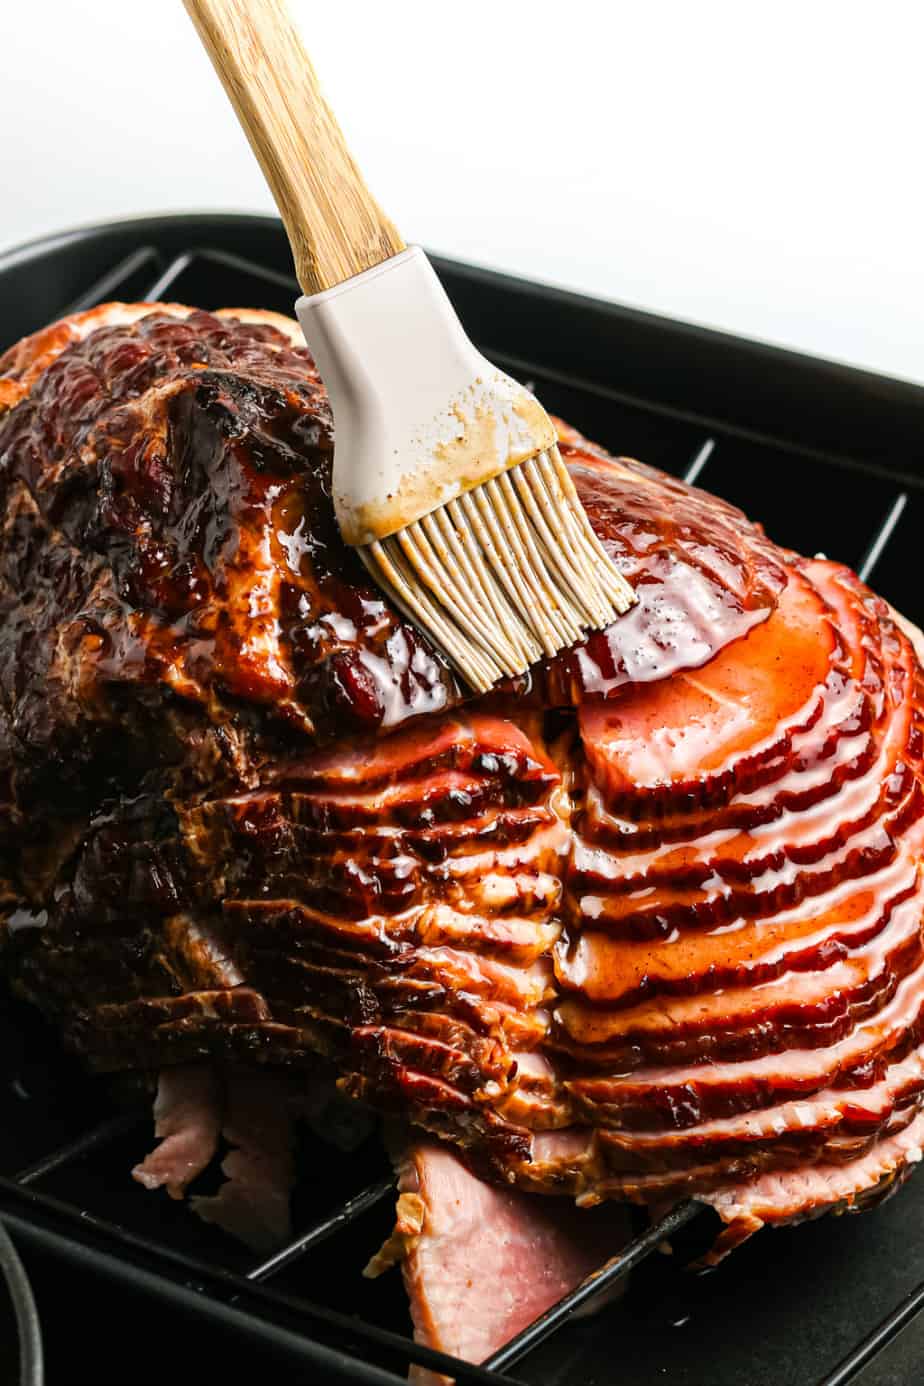 Glazing the ham with a silicone brush